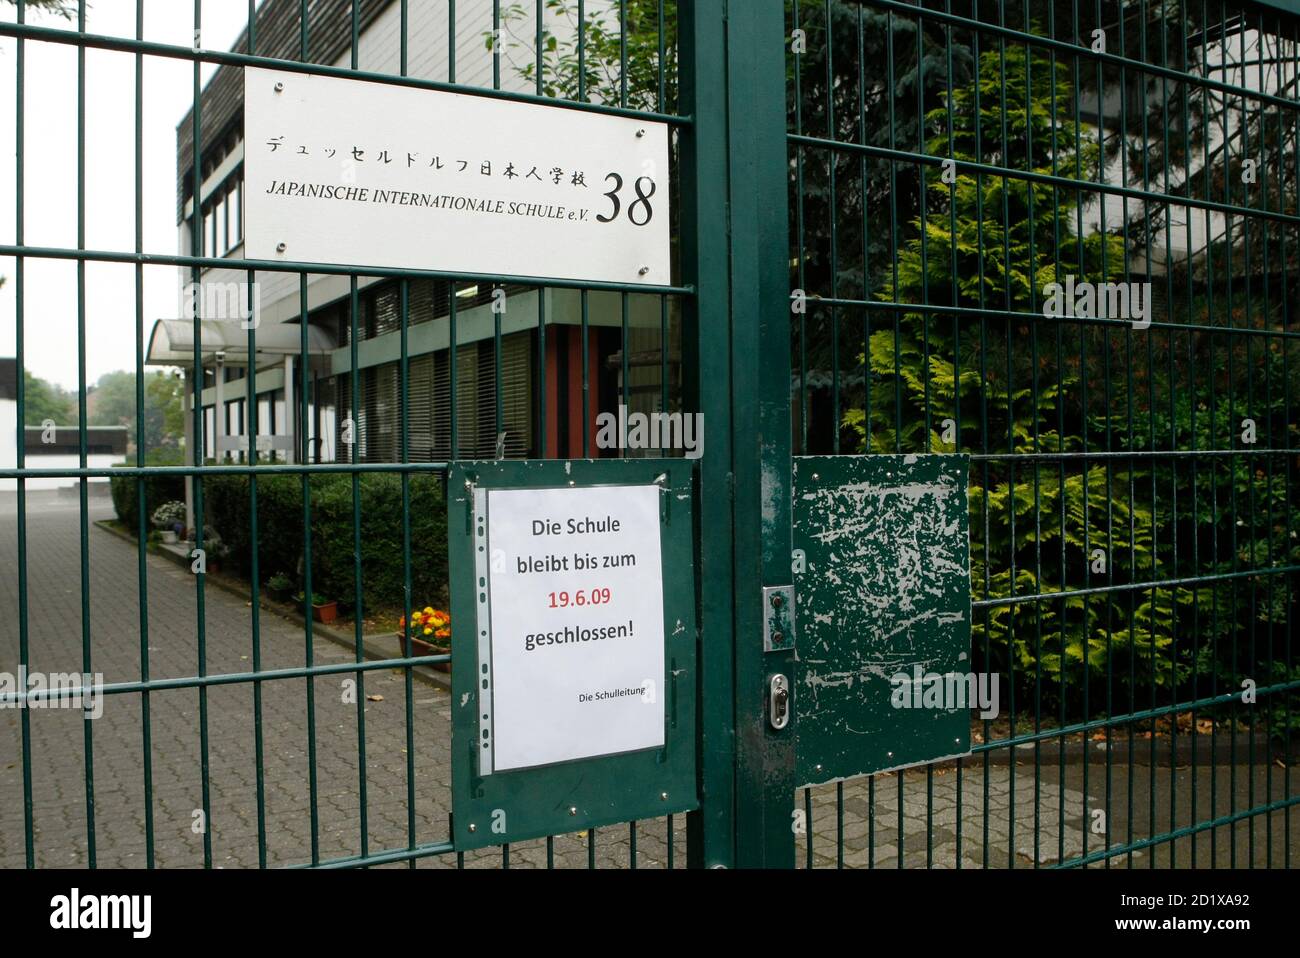 Picture Shows The Closed Gate Of The International Japanese School In A Suburb Of The Western German City Of Duesseldorf June 15 09 German Authorities Have Confirmed 65 Cases Of The H1n1